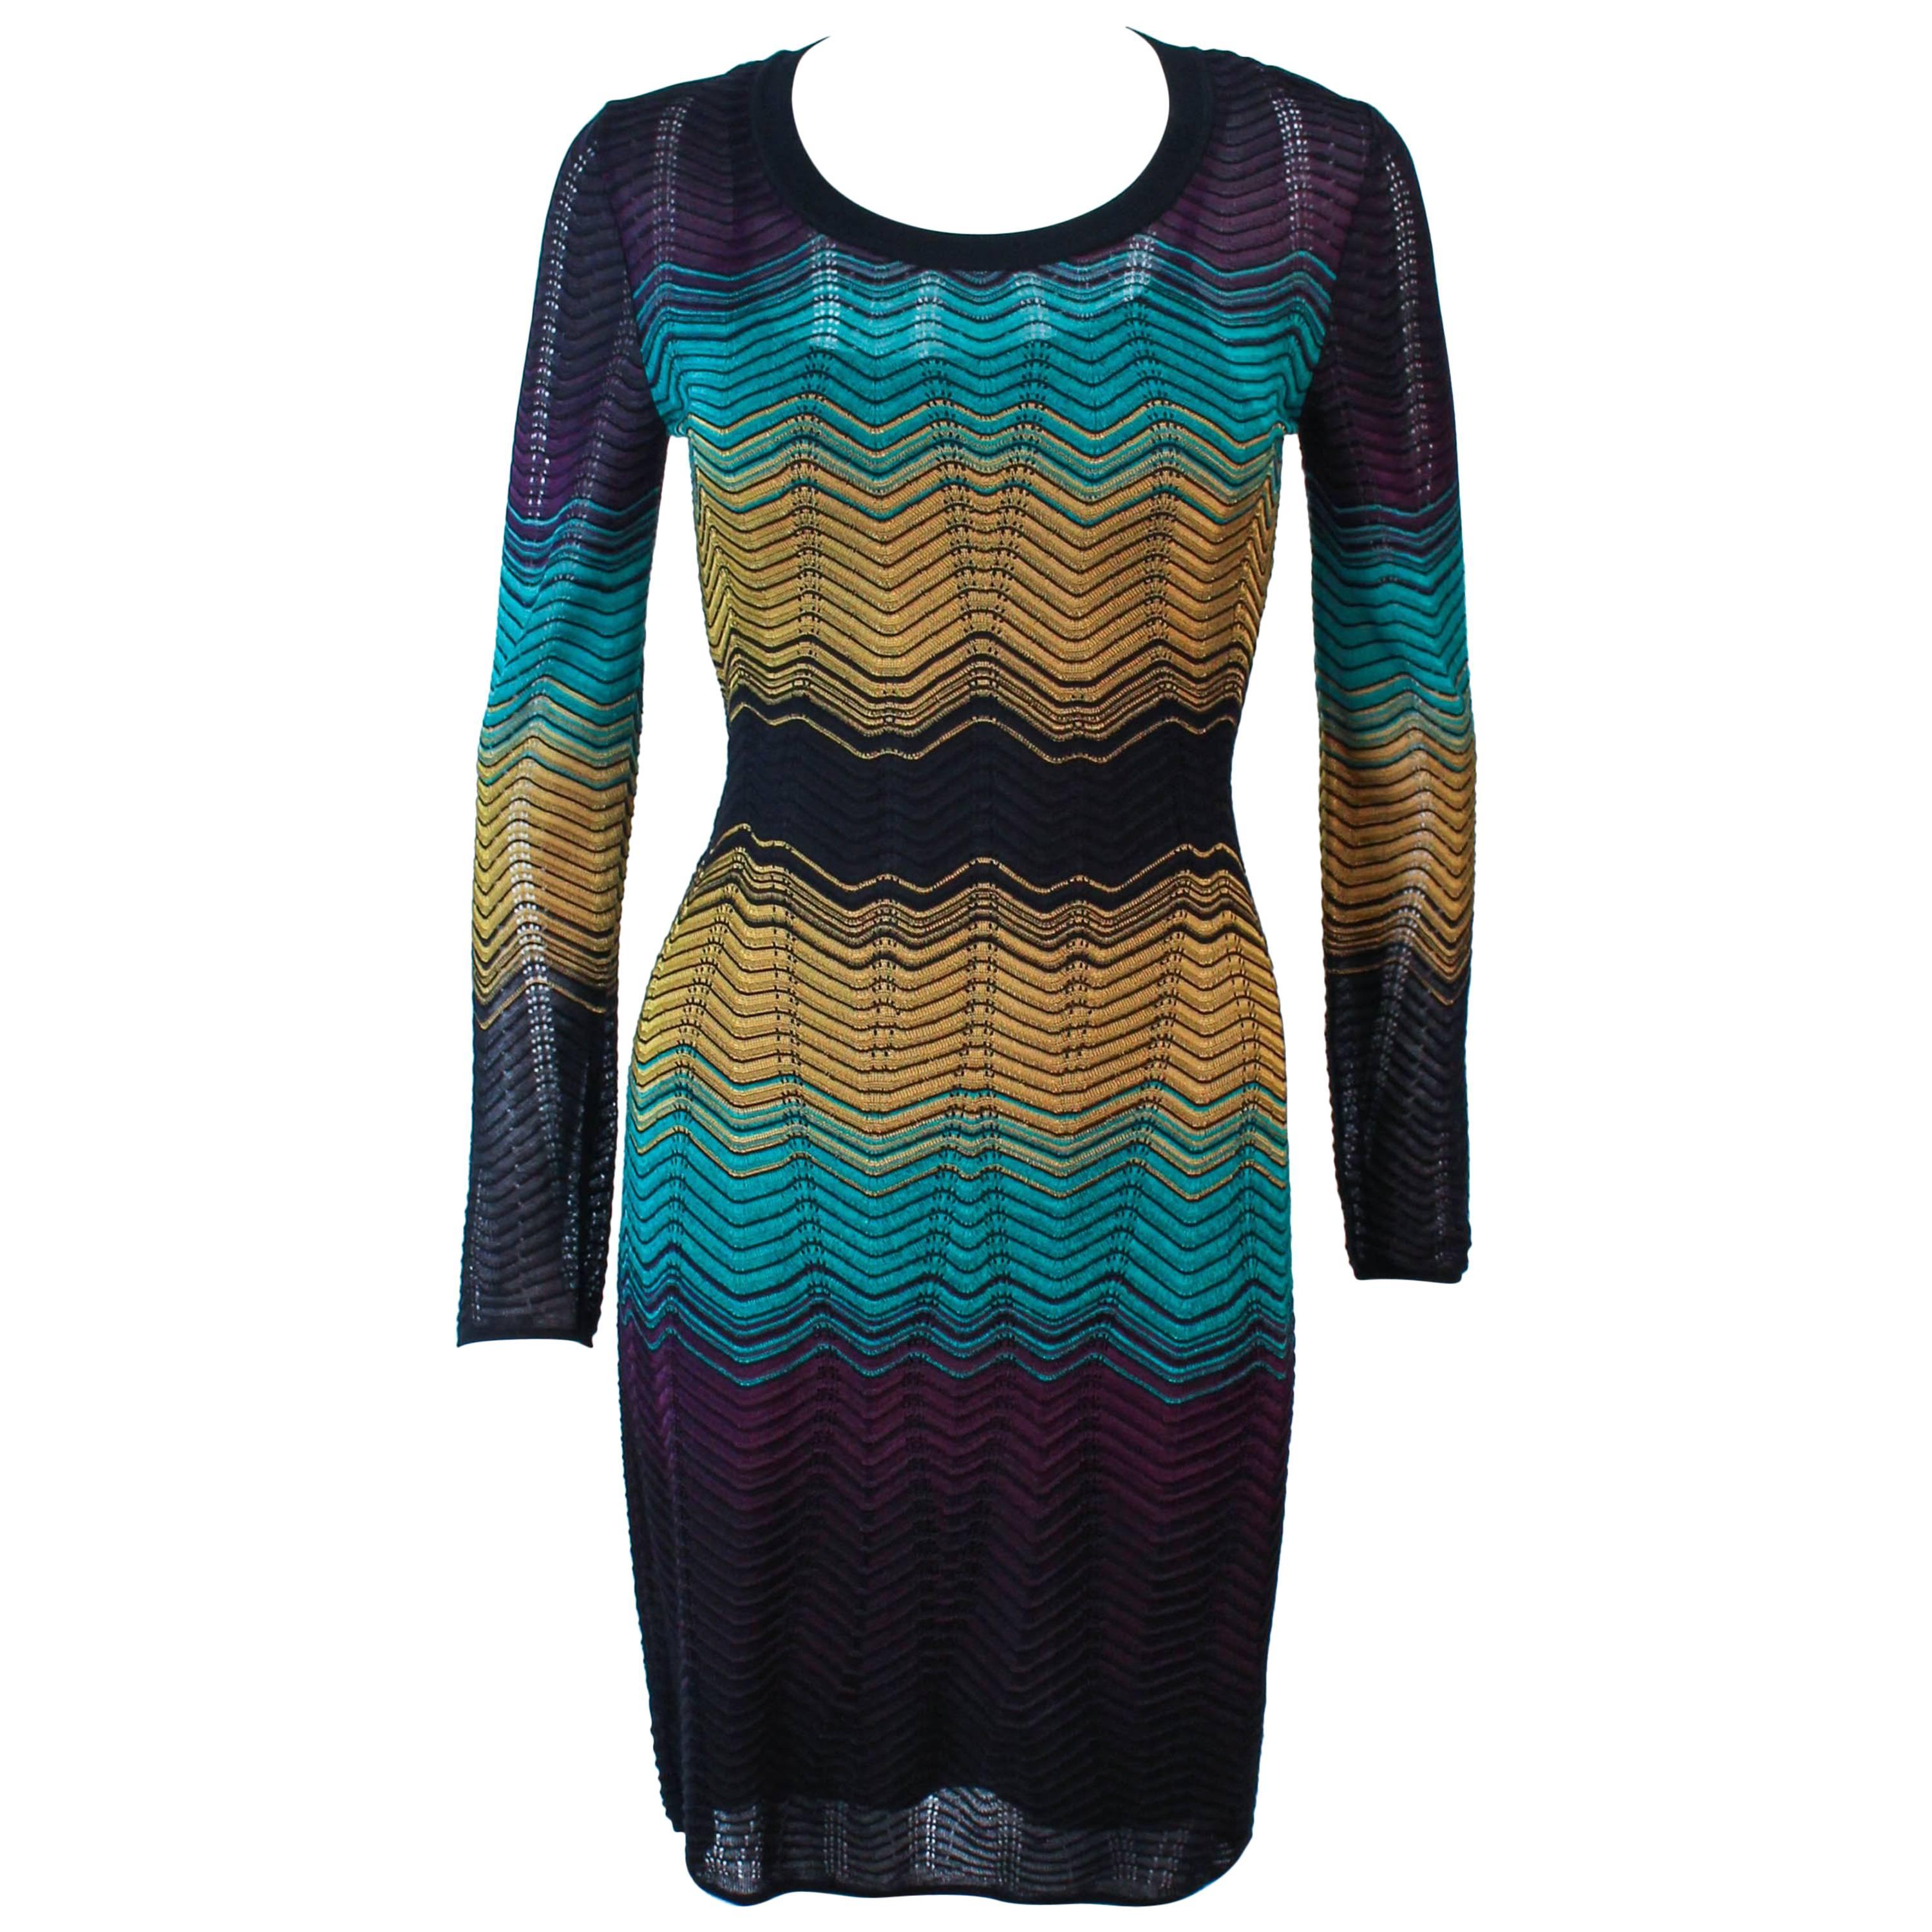 MISSONI NWT Navy and Mustard Zig Zag Knit Dress Size 40 For Sale